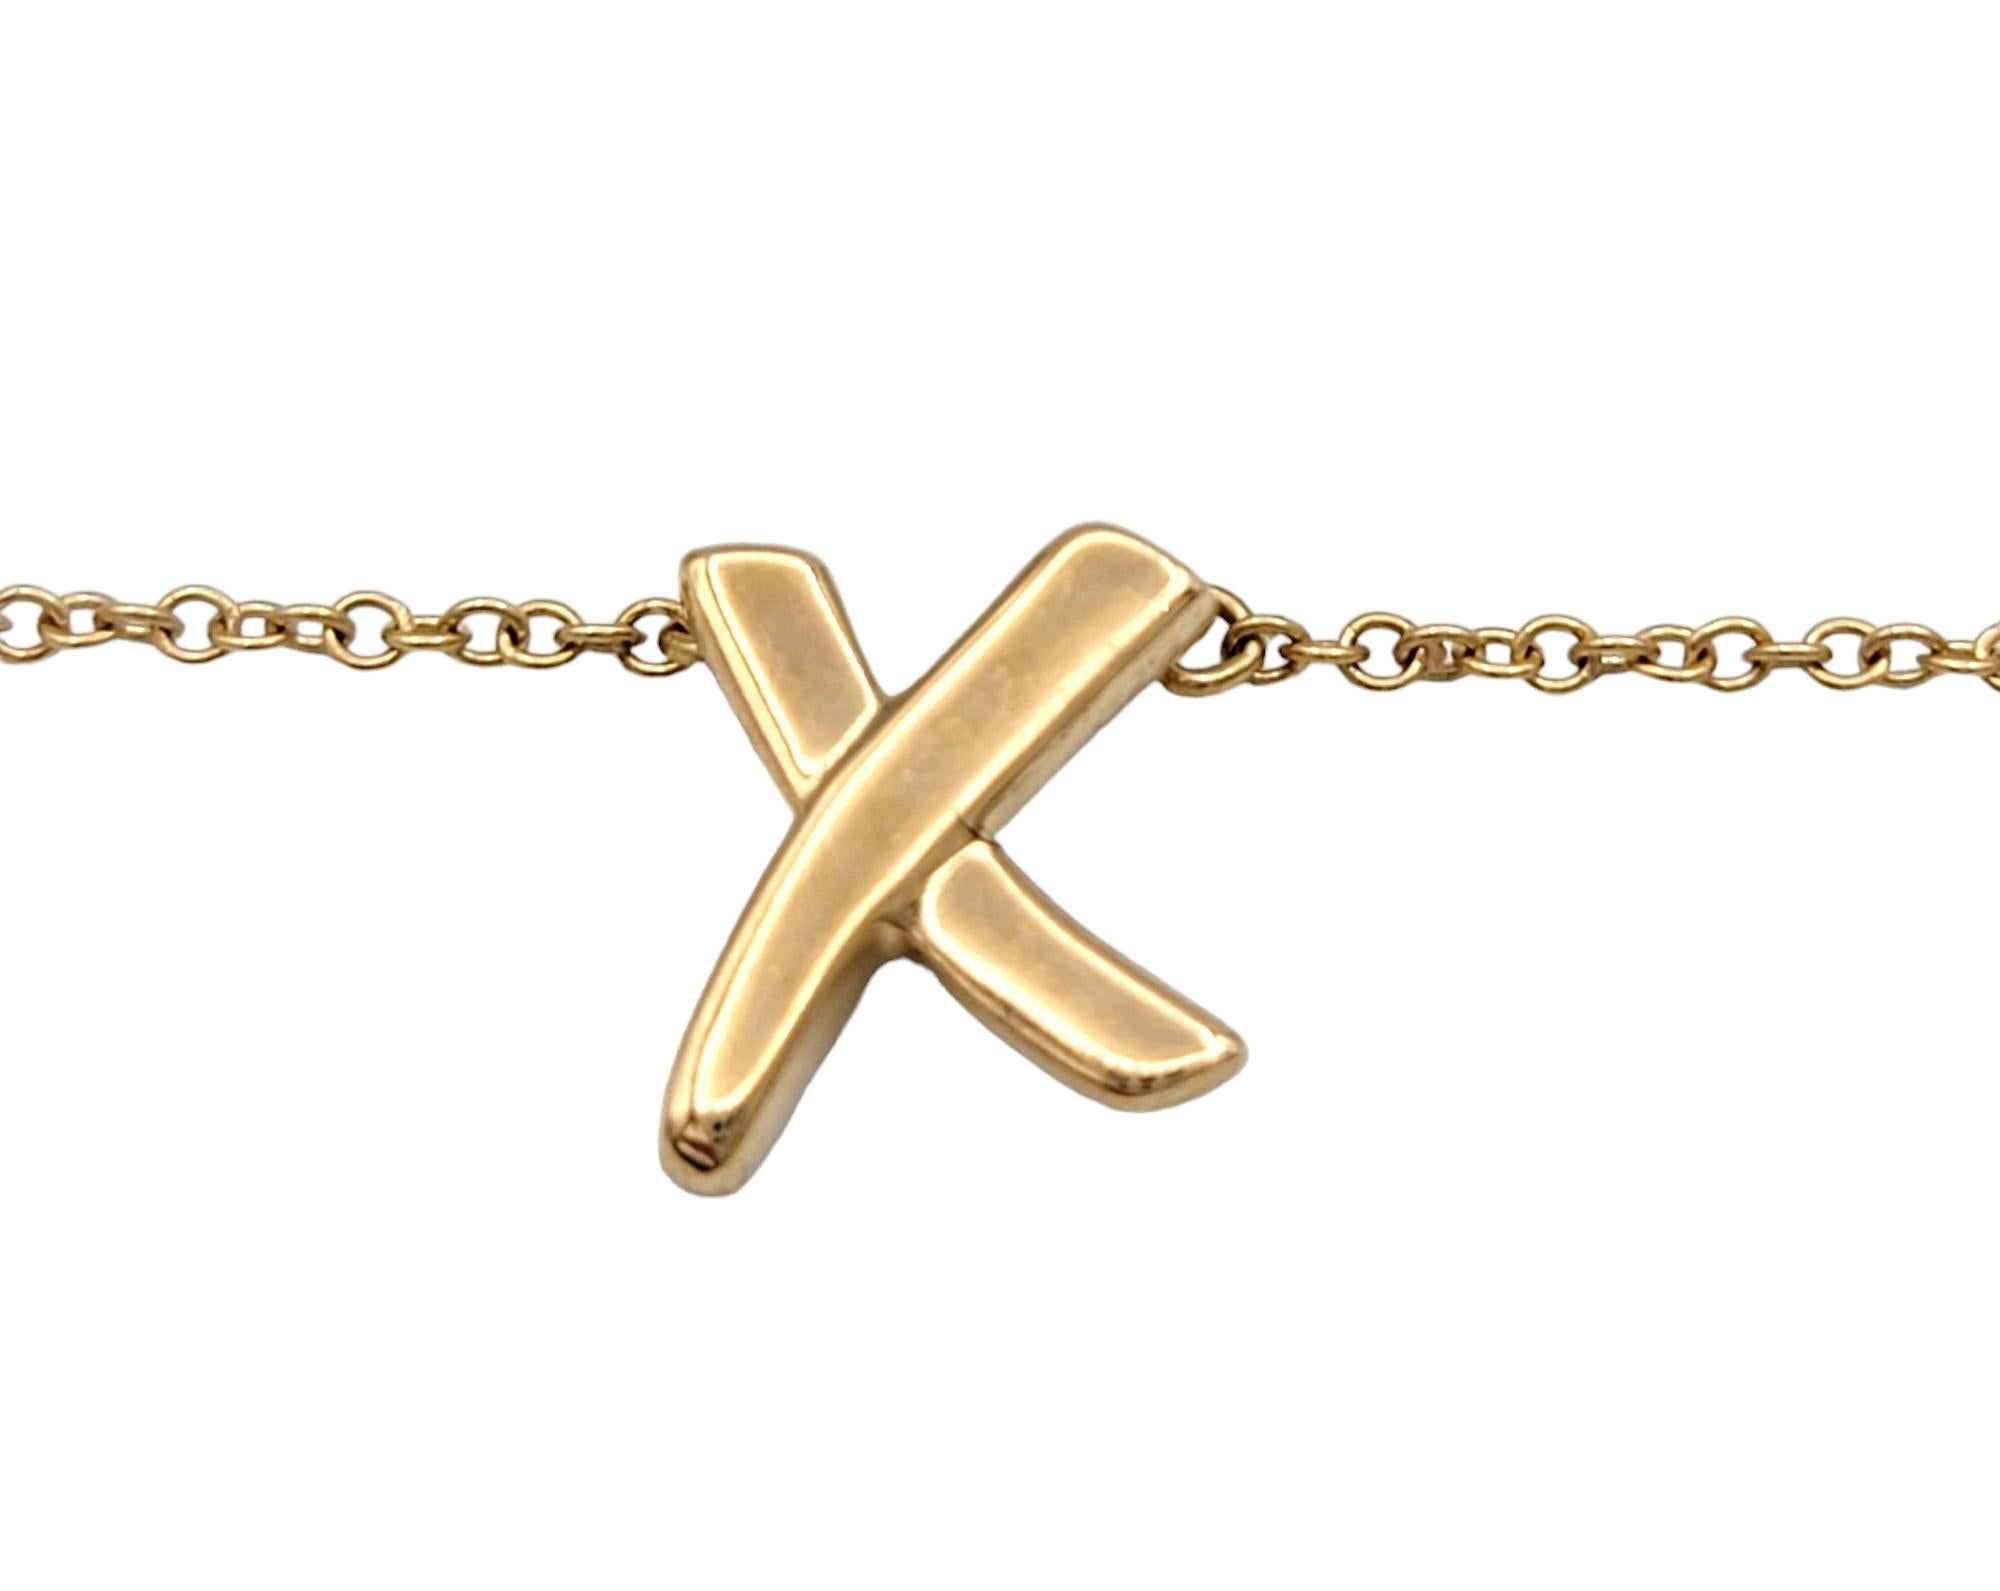 The Tiffany & Co. Paloma Picasso's Graffiti X pendant necklace is a bold and contemporary expression of style and luxury. The pendant features a striking asymmetrical X design, exuding a sense of modern artistry. This distinctive piece is fashioned